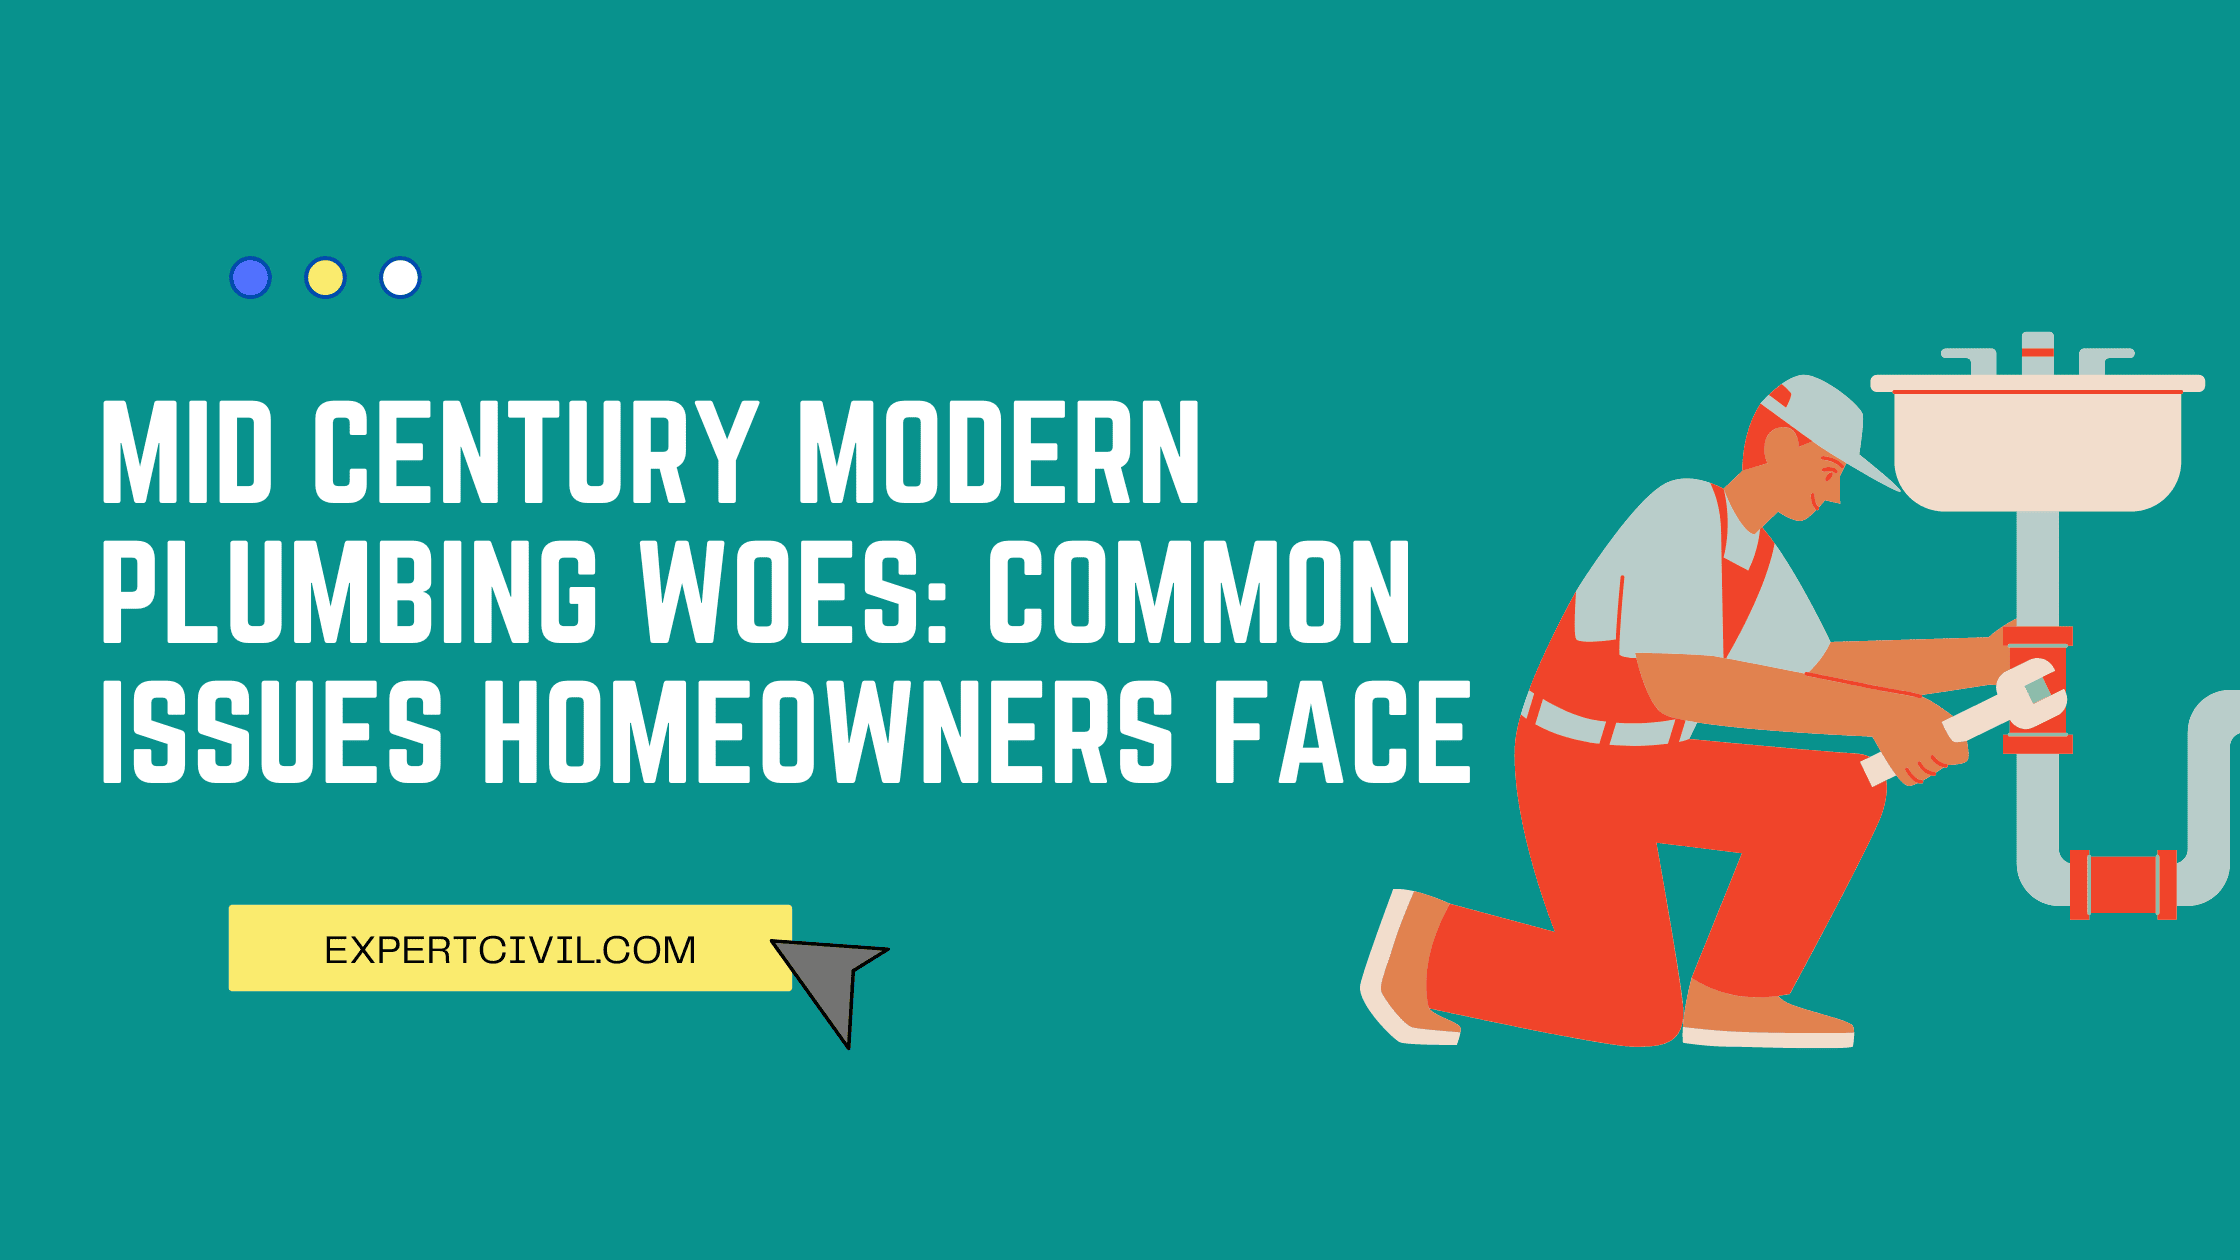 Mid Century Modern Plumbing Woes: Common Issues Homeowners Face